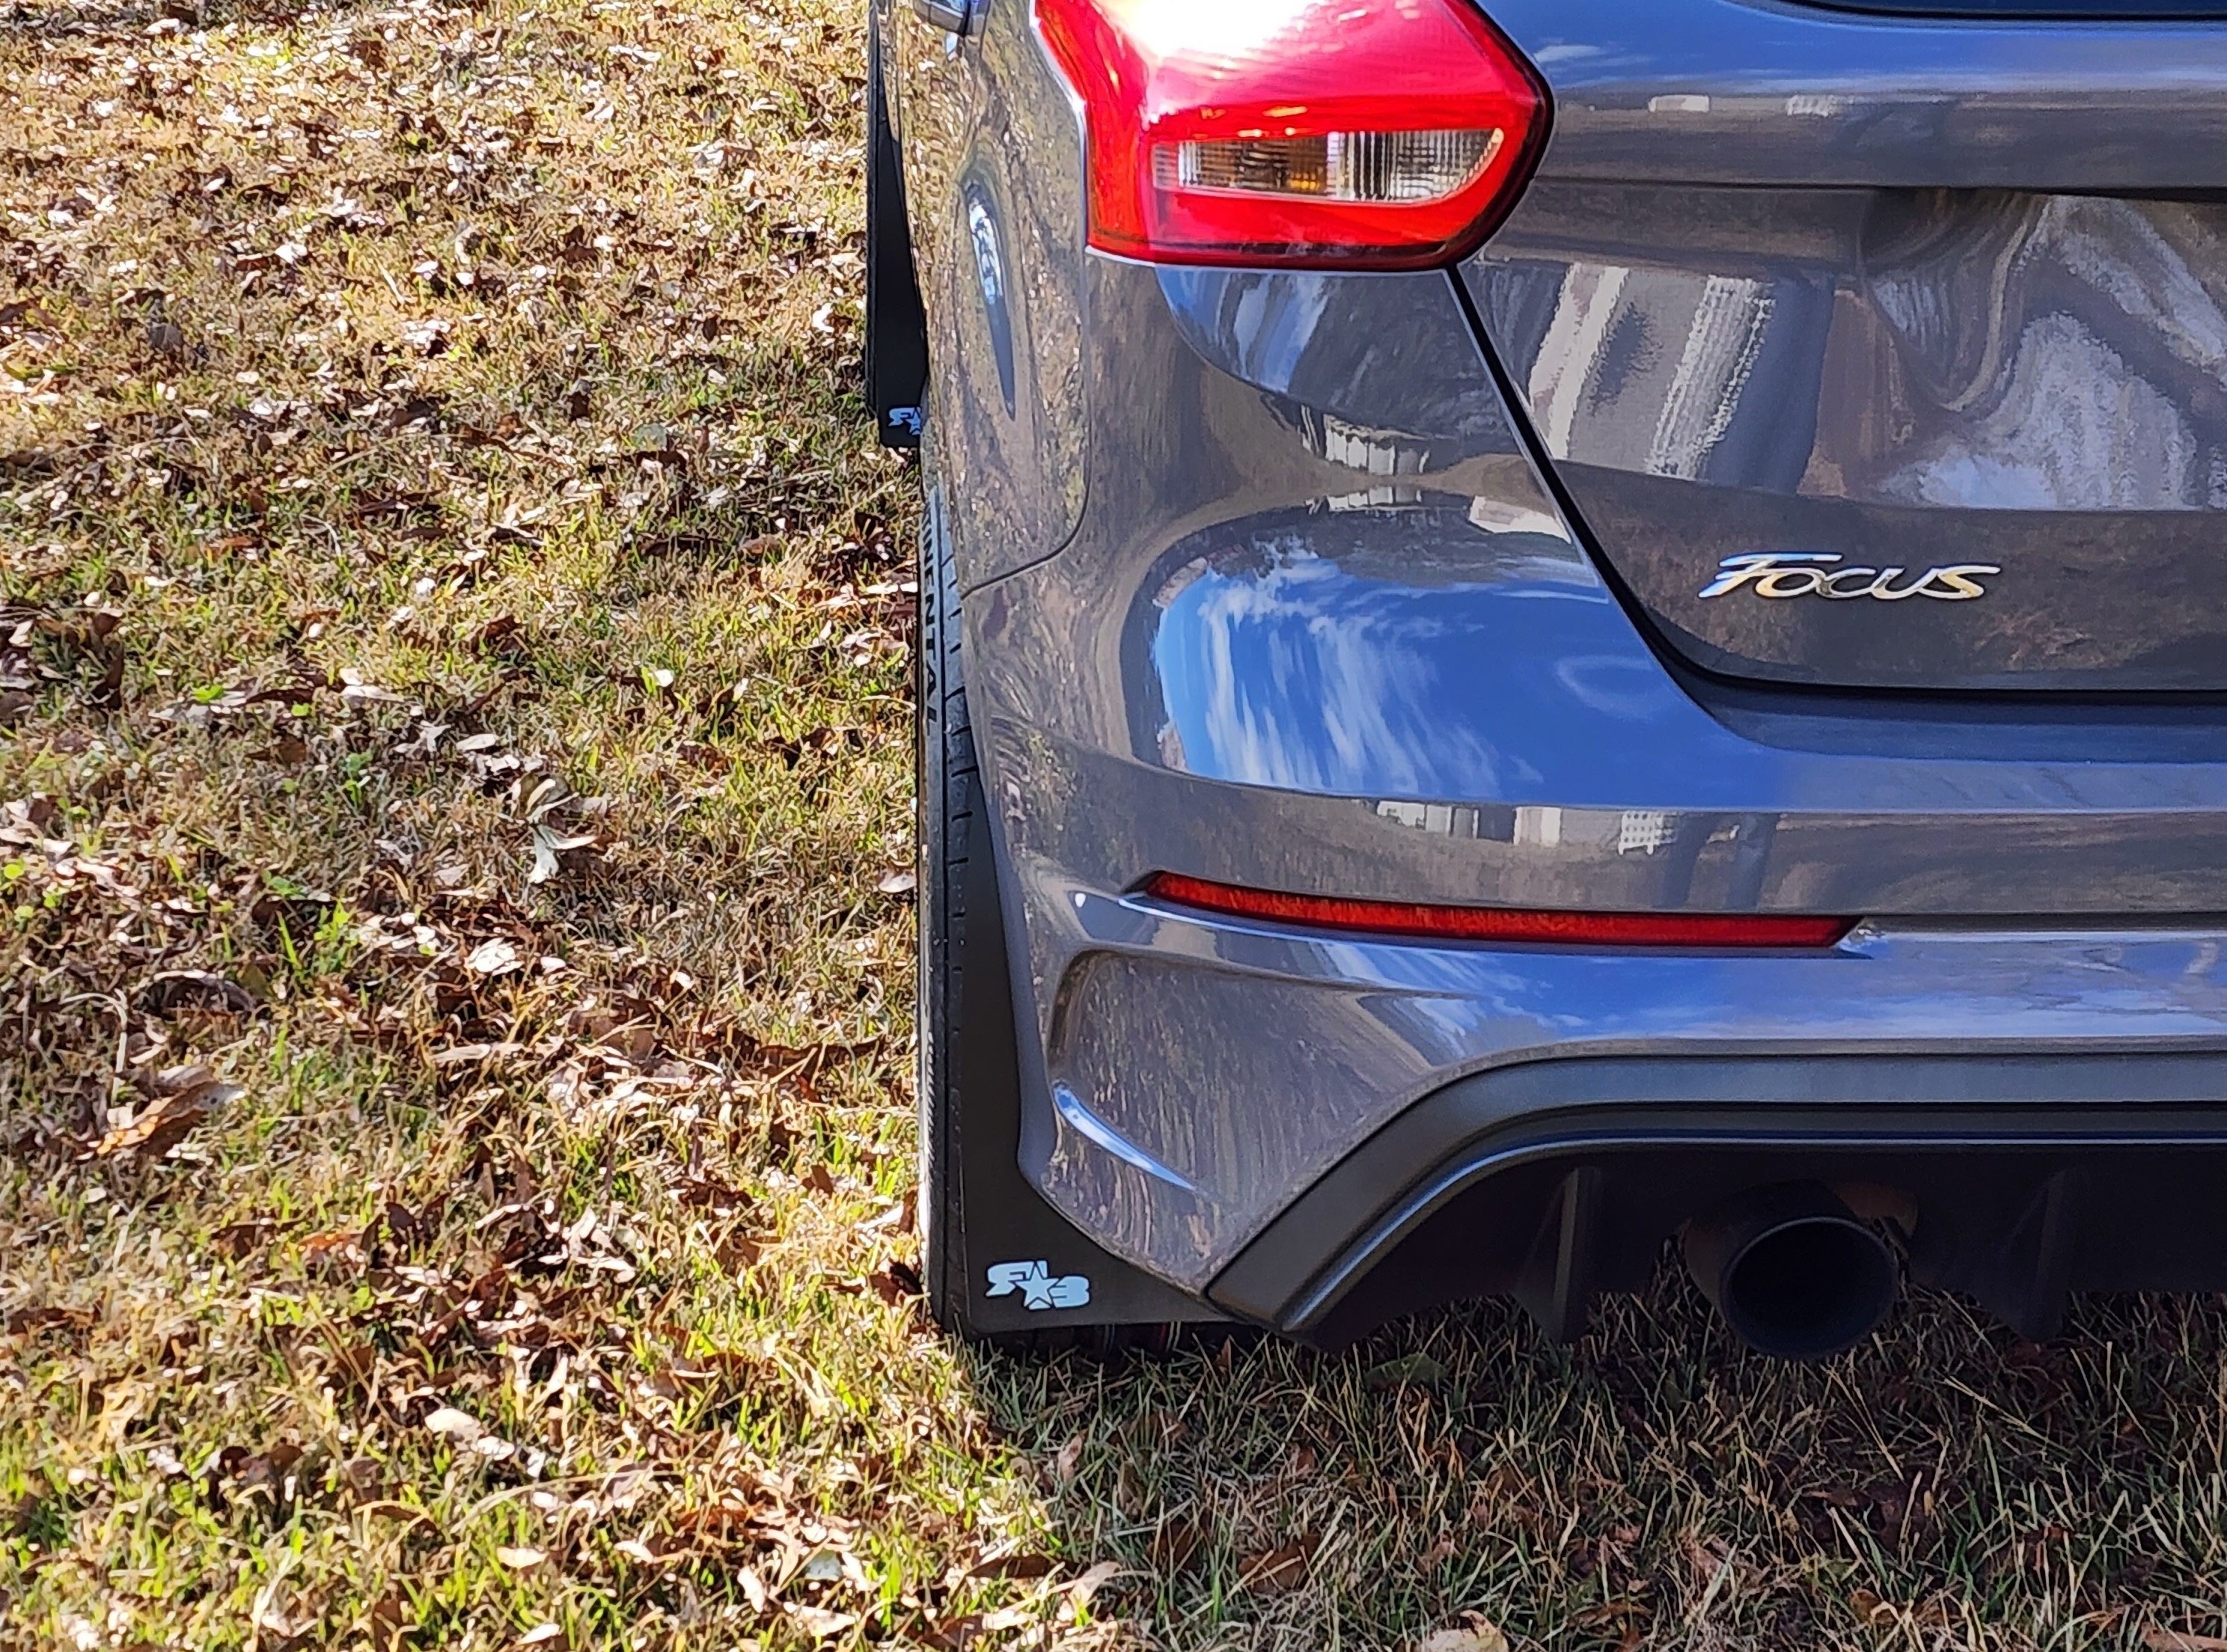 Focus RS rear view